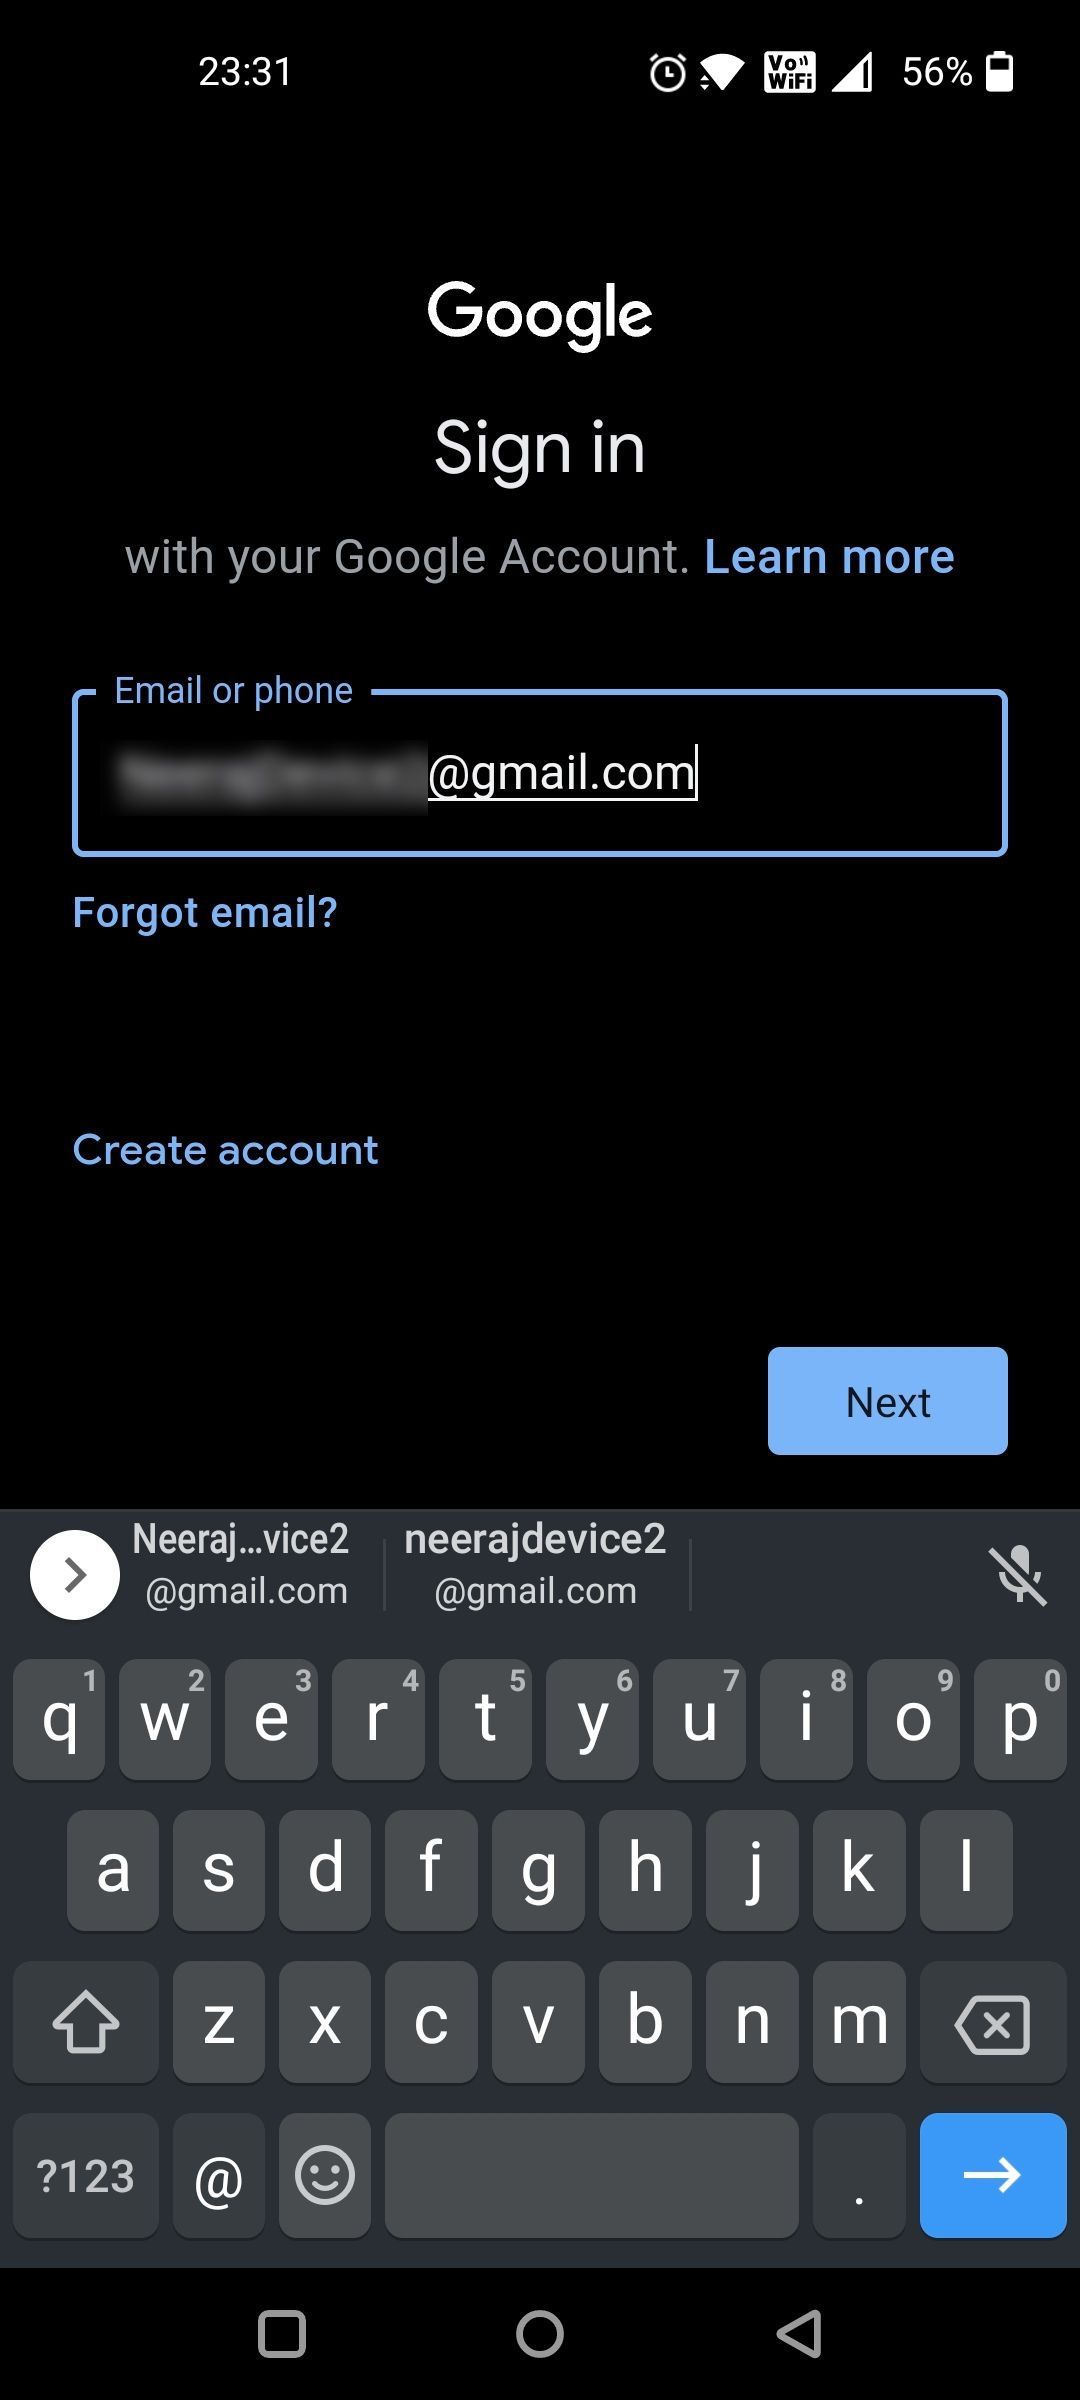 Sign in with Email of New Device